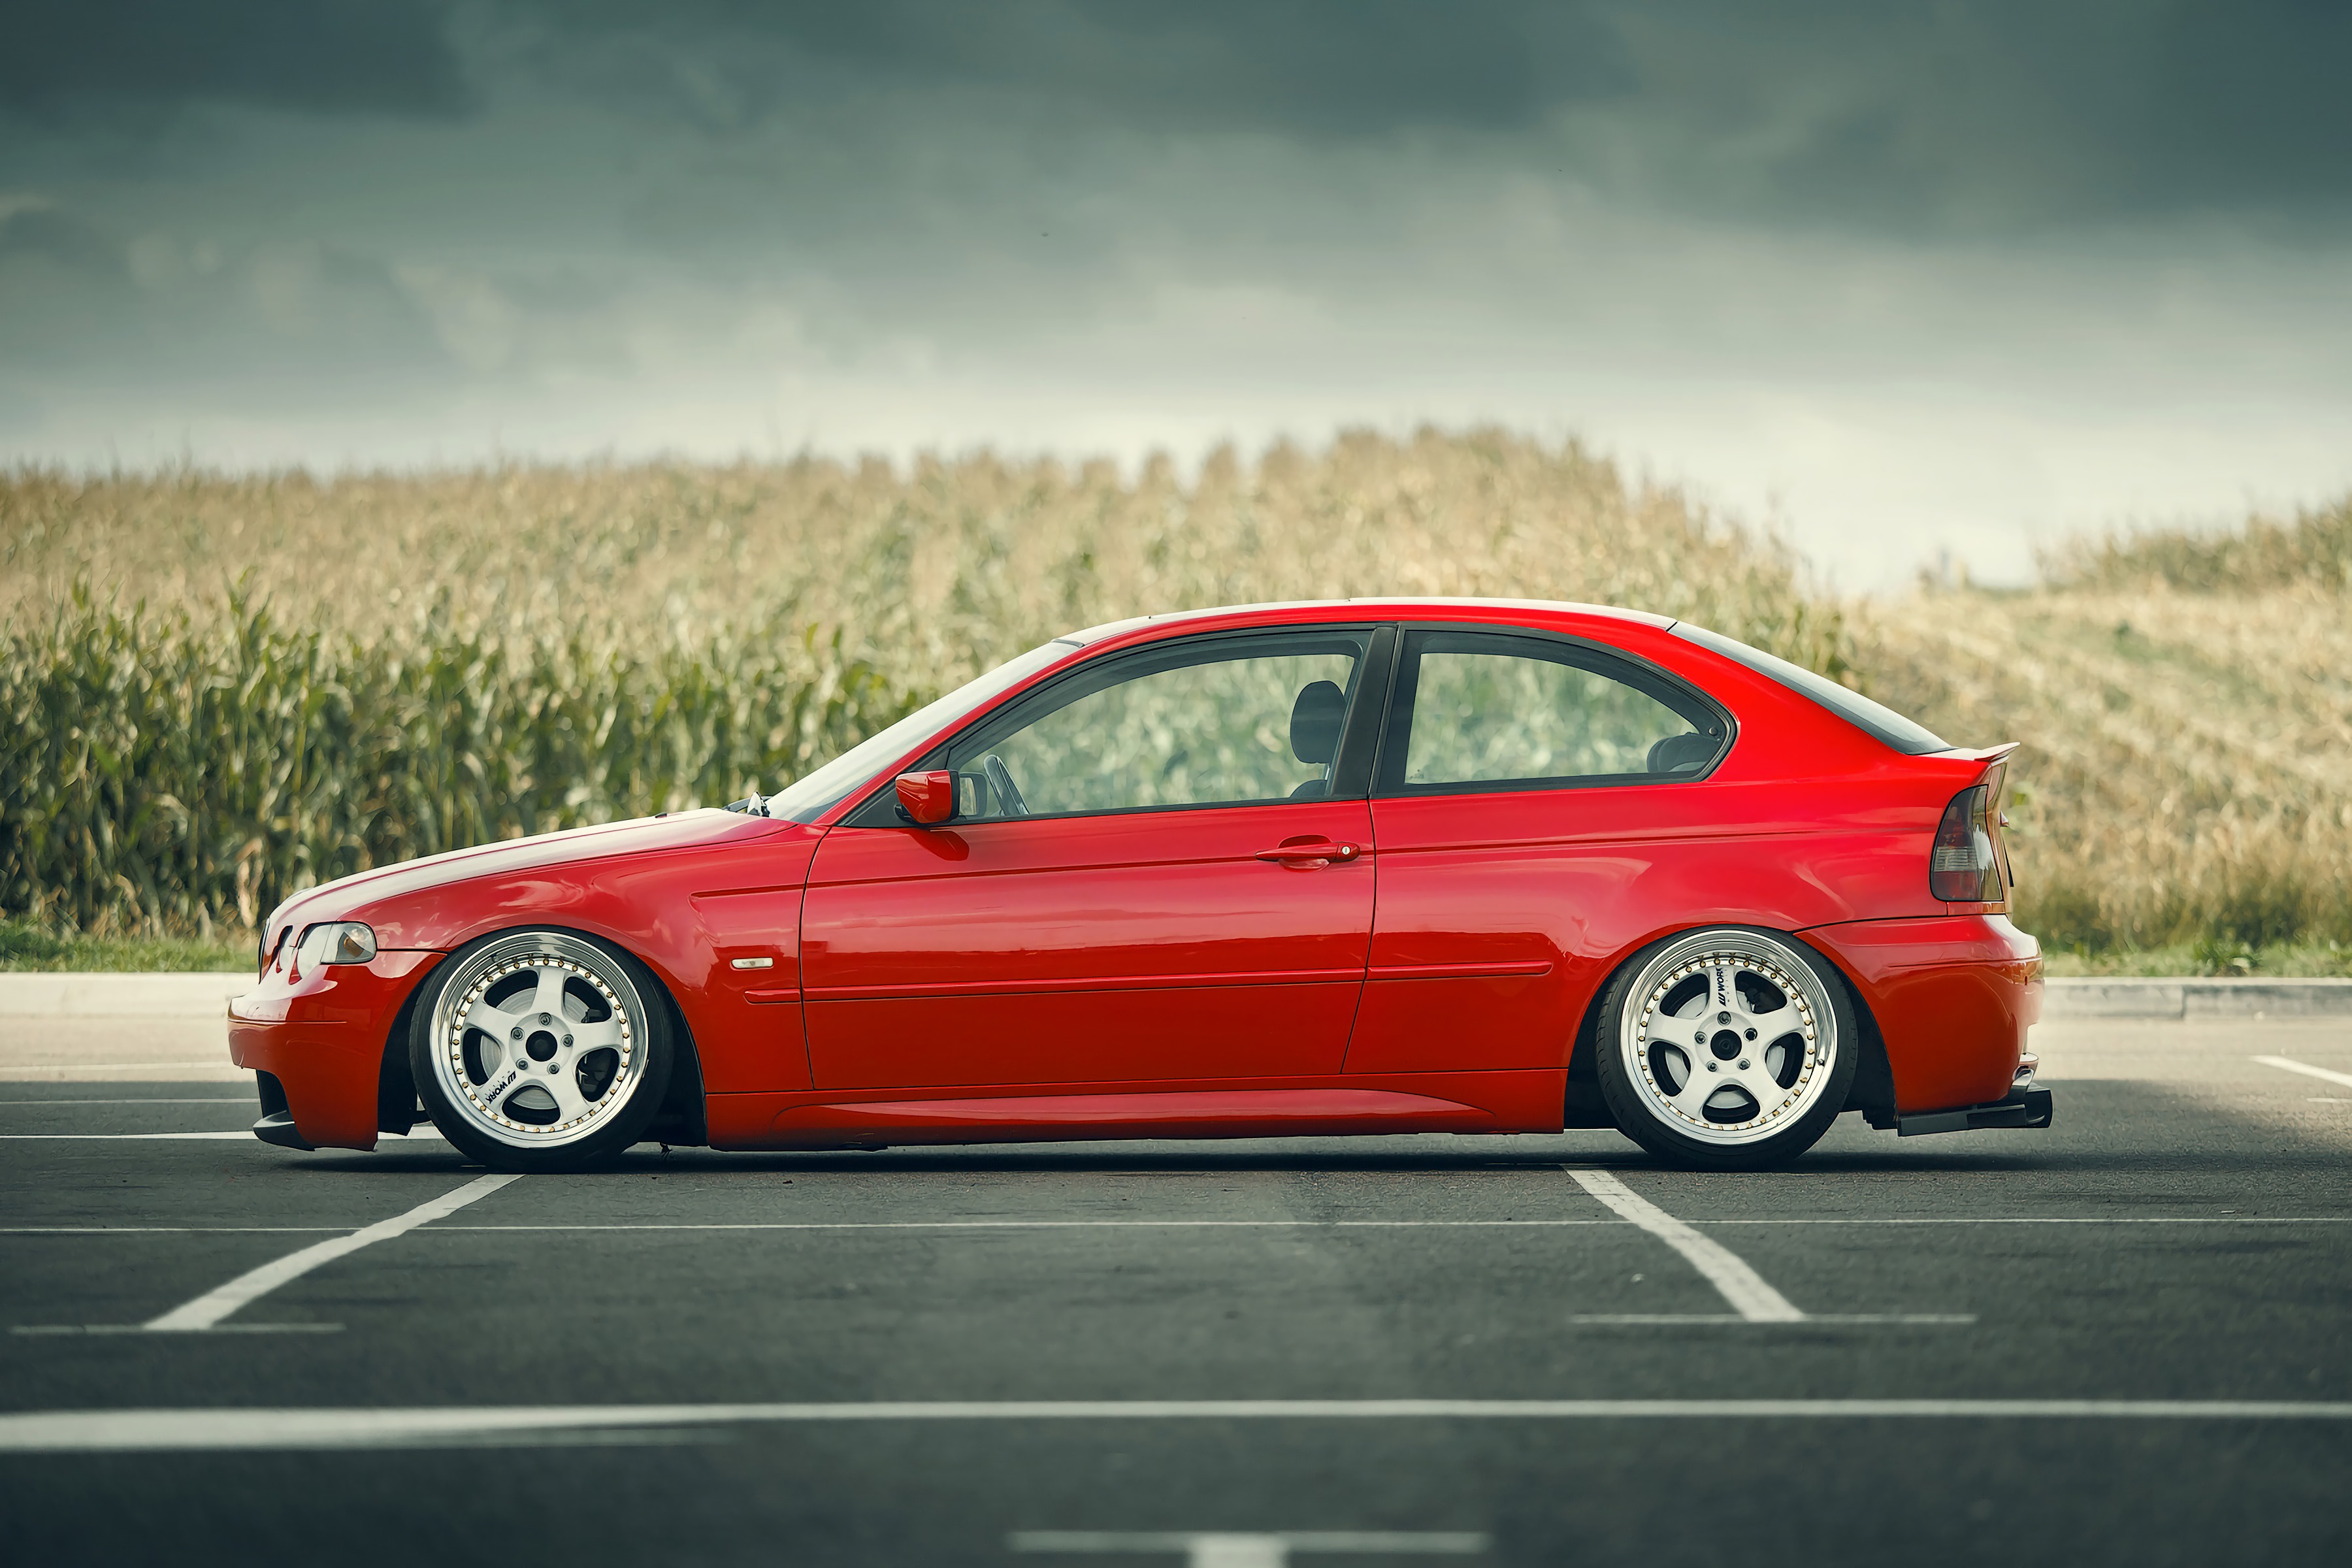 General 3600x2400 BMW stance (cars) Work Wheels red car BMW E46/5 BMW 3 Series side view red cars vehicle